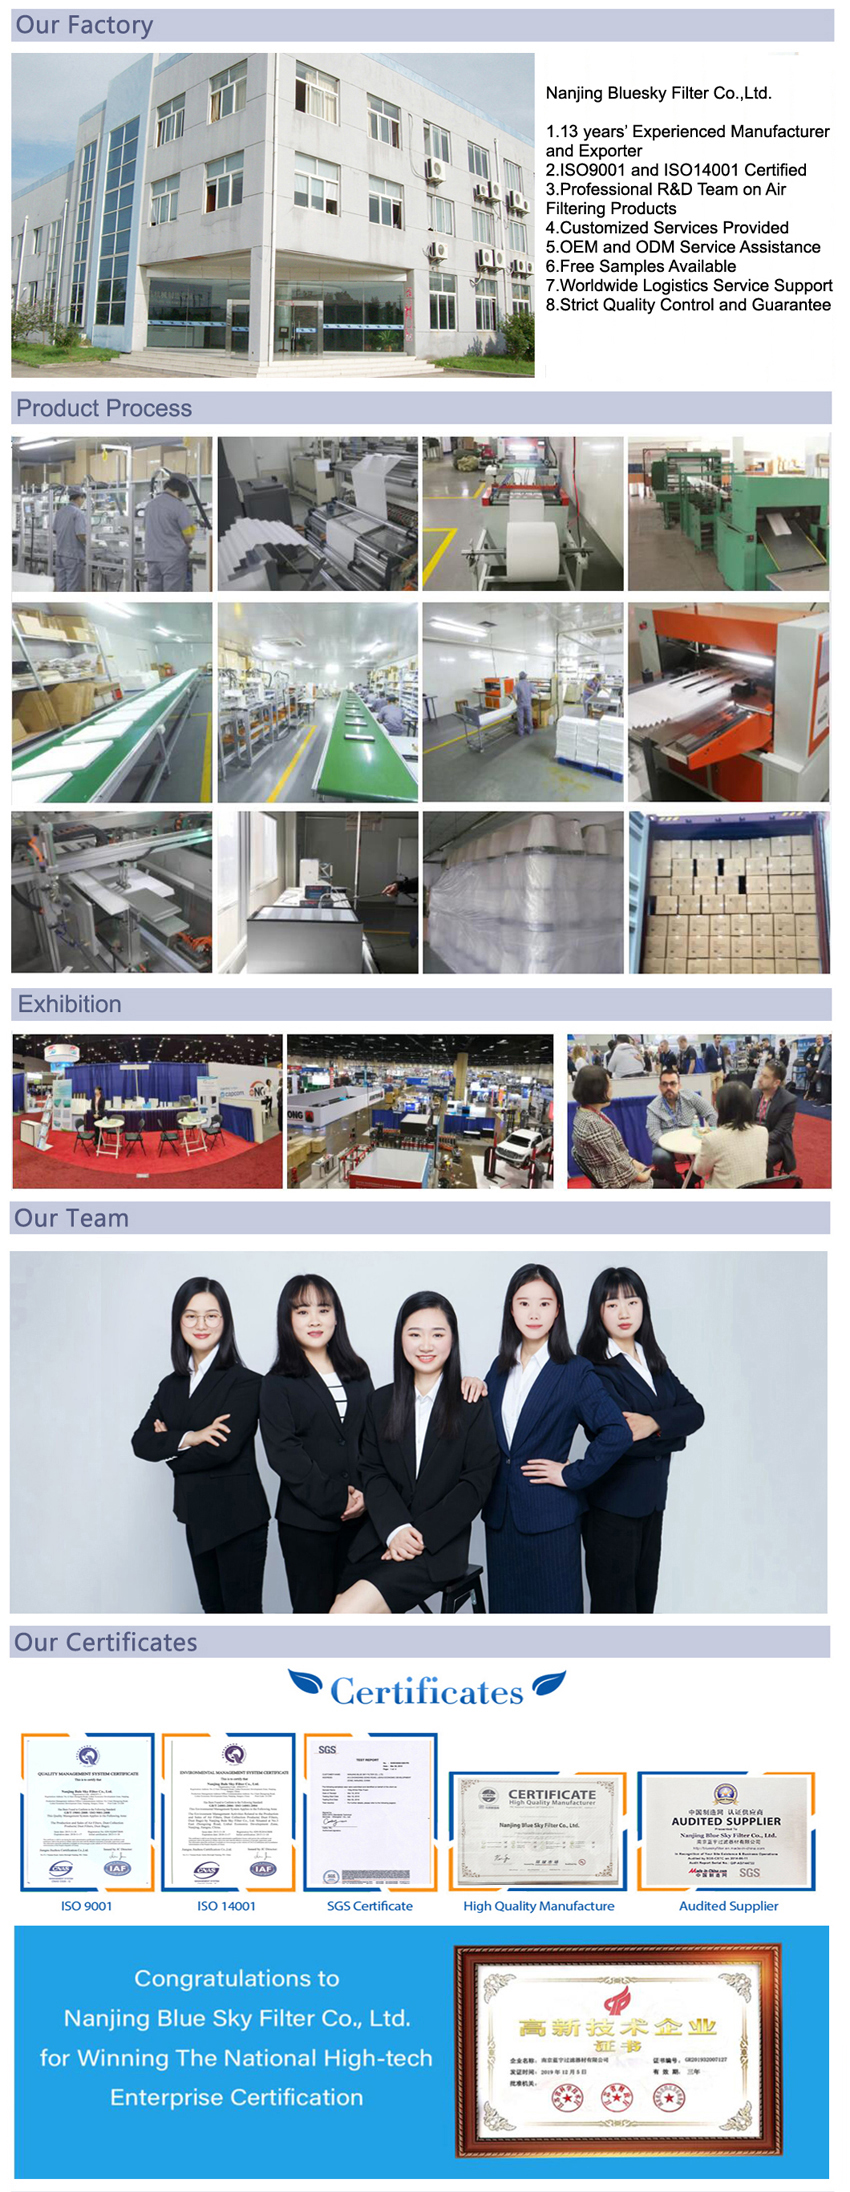 Our Company of Rowenta Vacuum Cleaner Filters